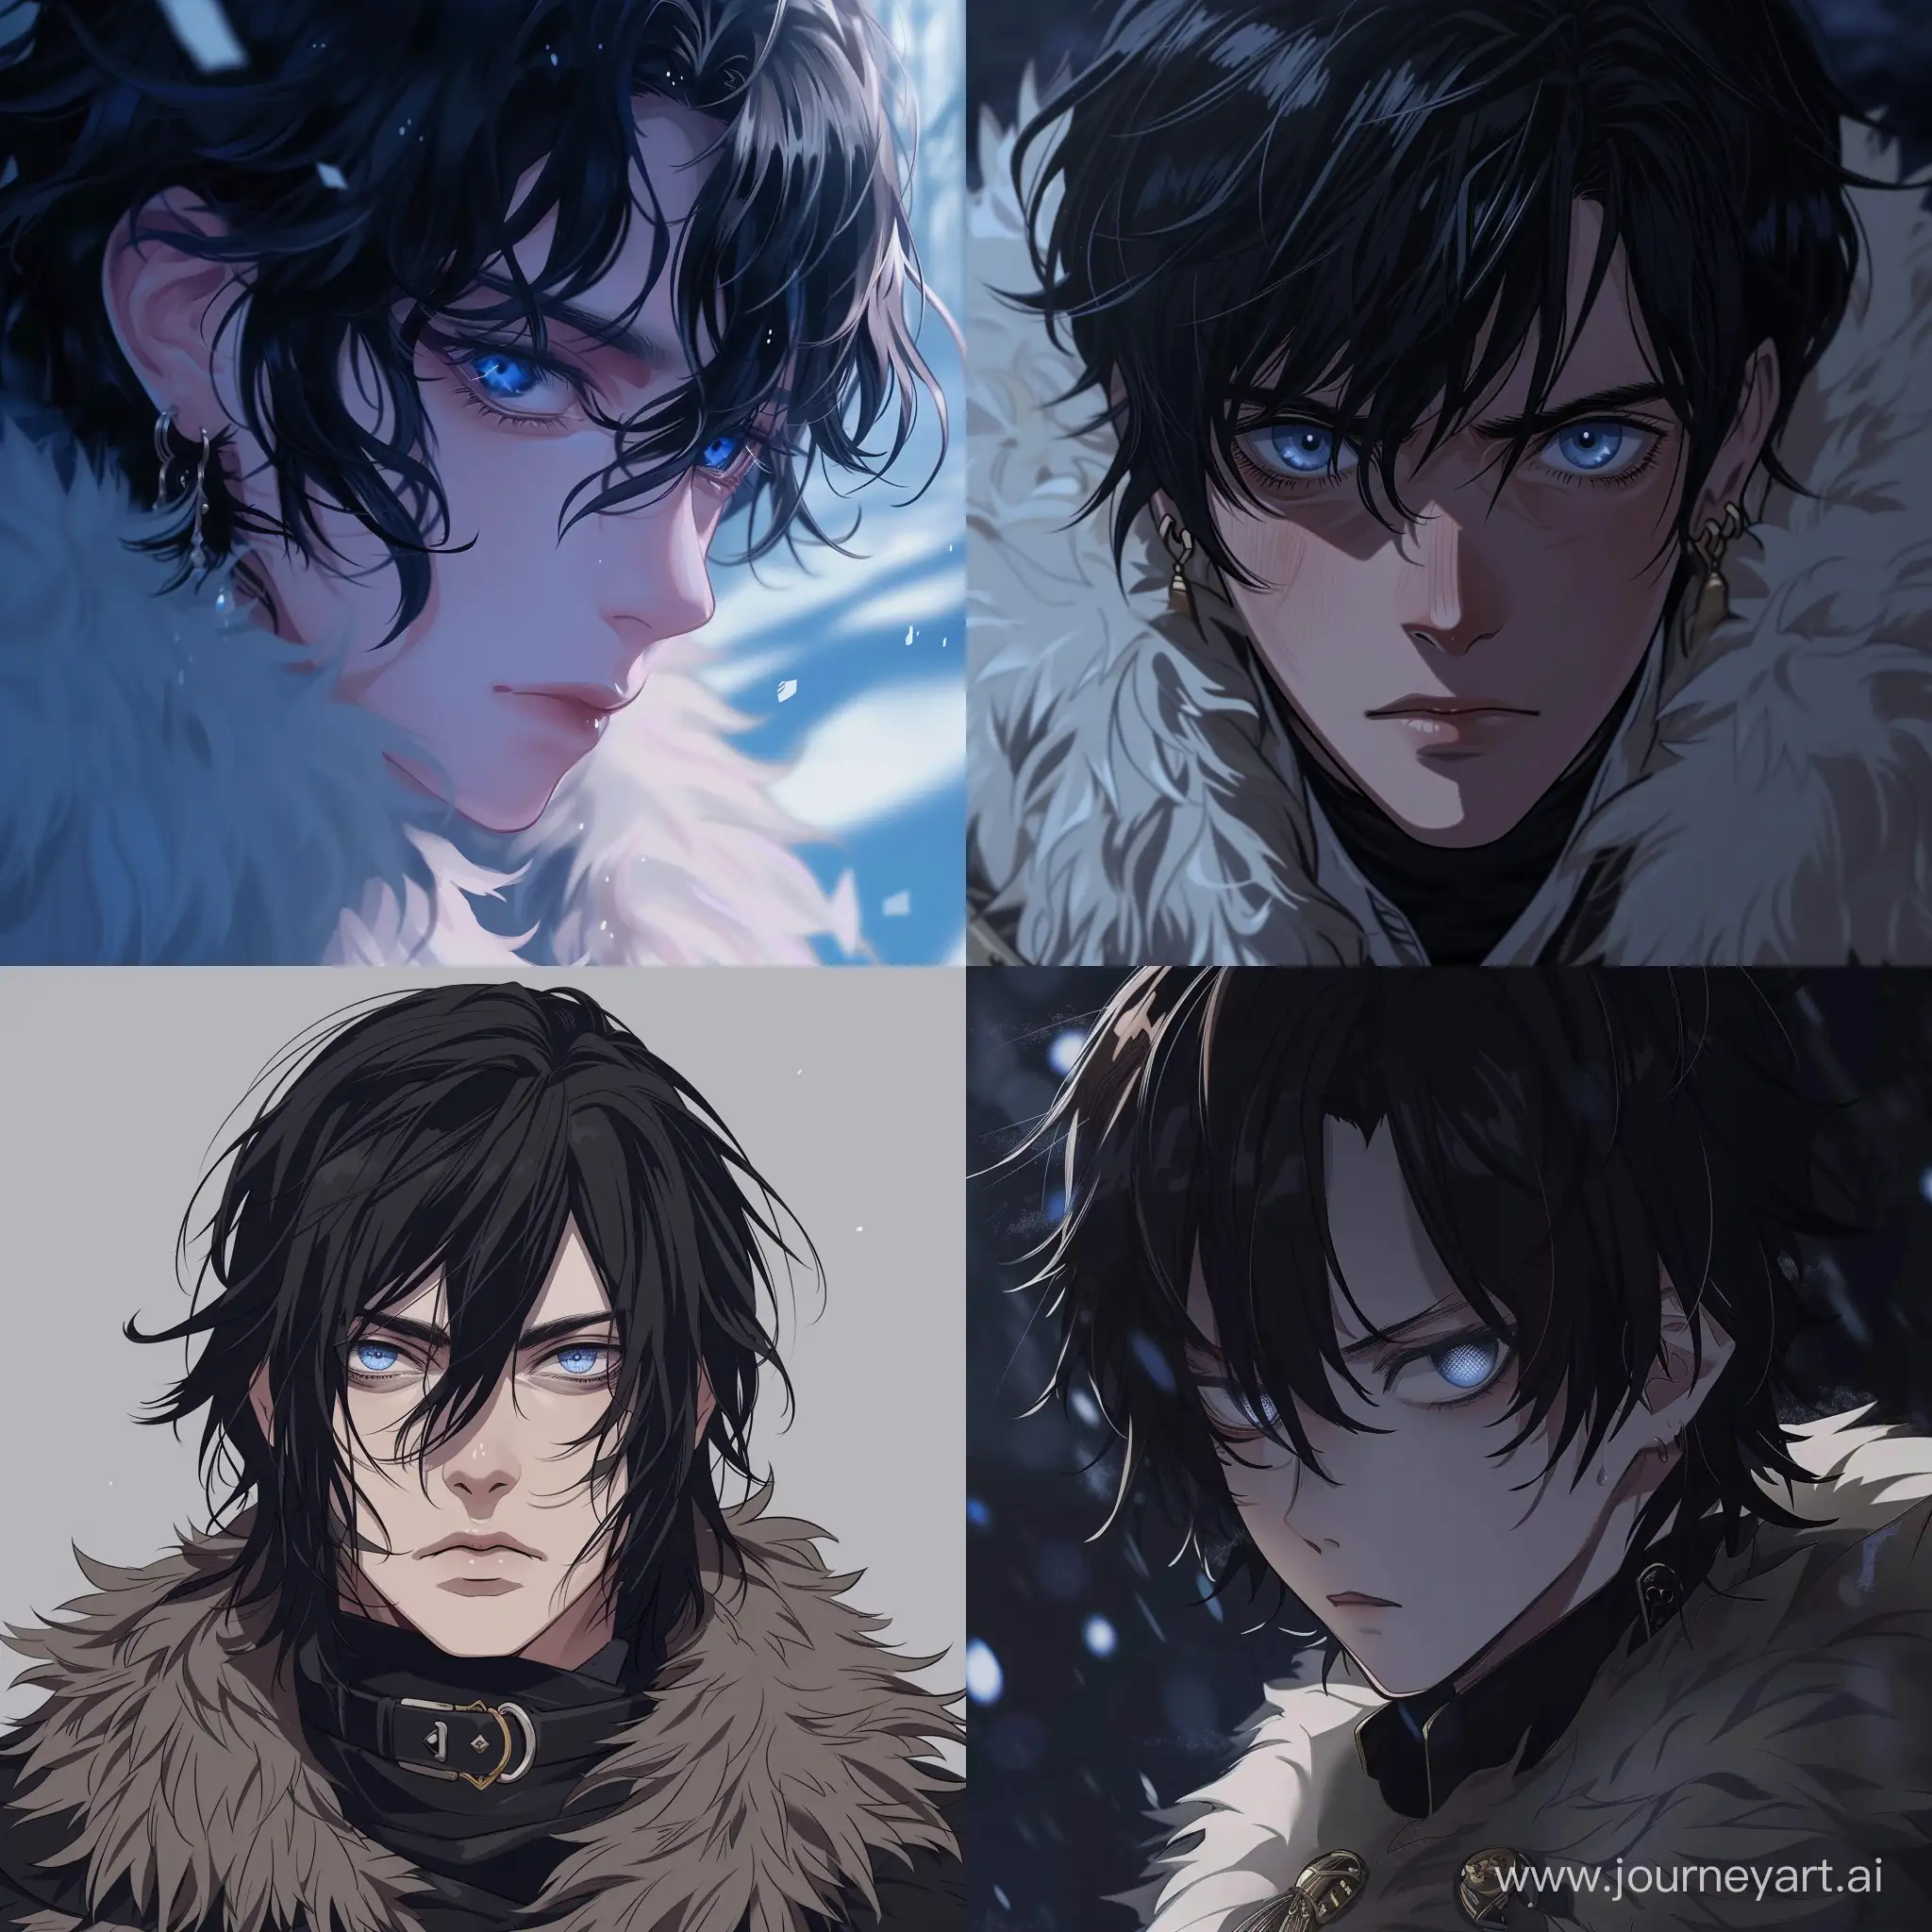 Cold blooded young duke of the North with black hair and cold dark blue eyes in anime style